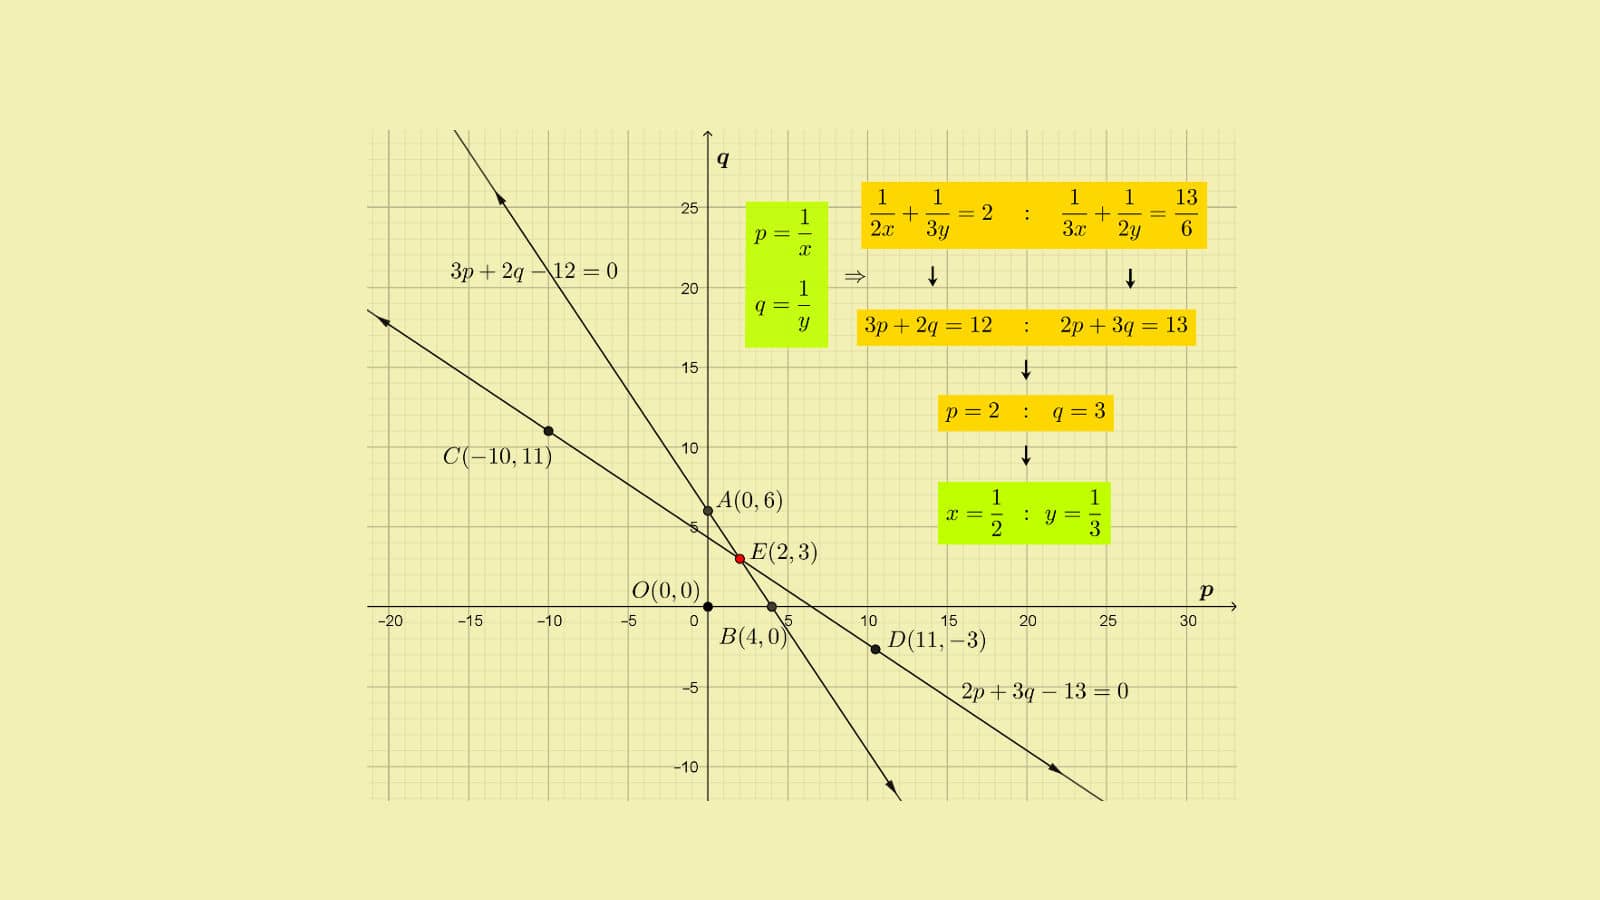 NCERT solutions reducing method class 10 for solving non-linear equations